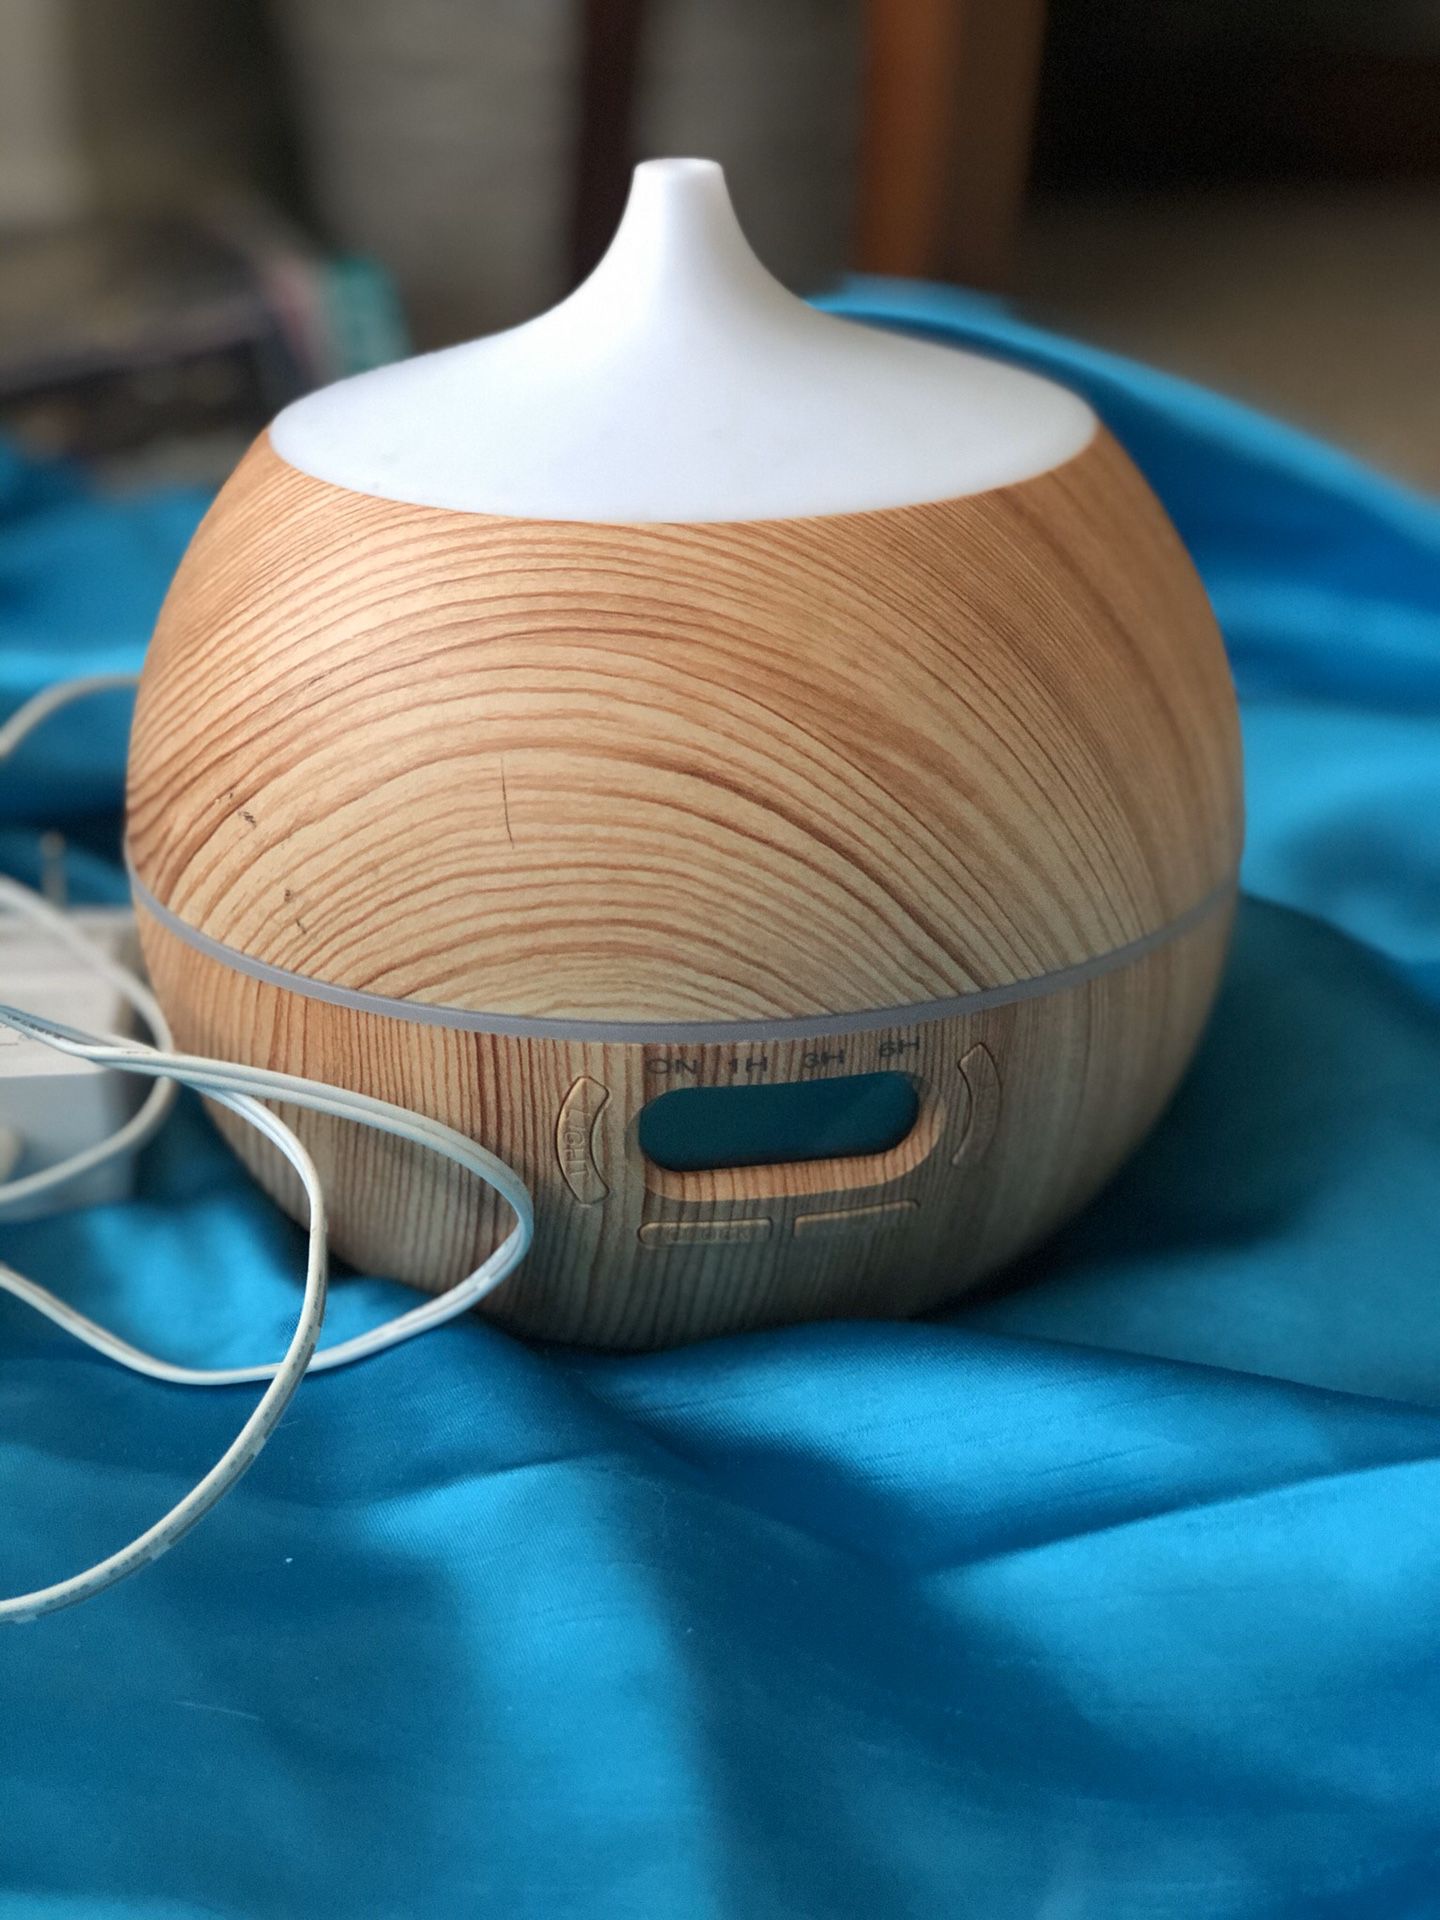 At home essential oils diffuser & slight humidifier wood panel style white spout plug in Preowned